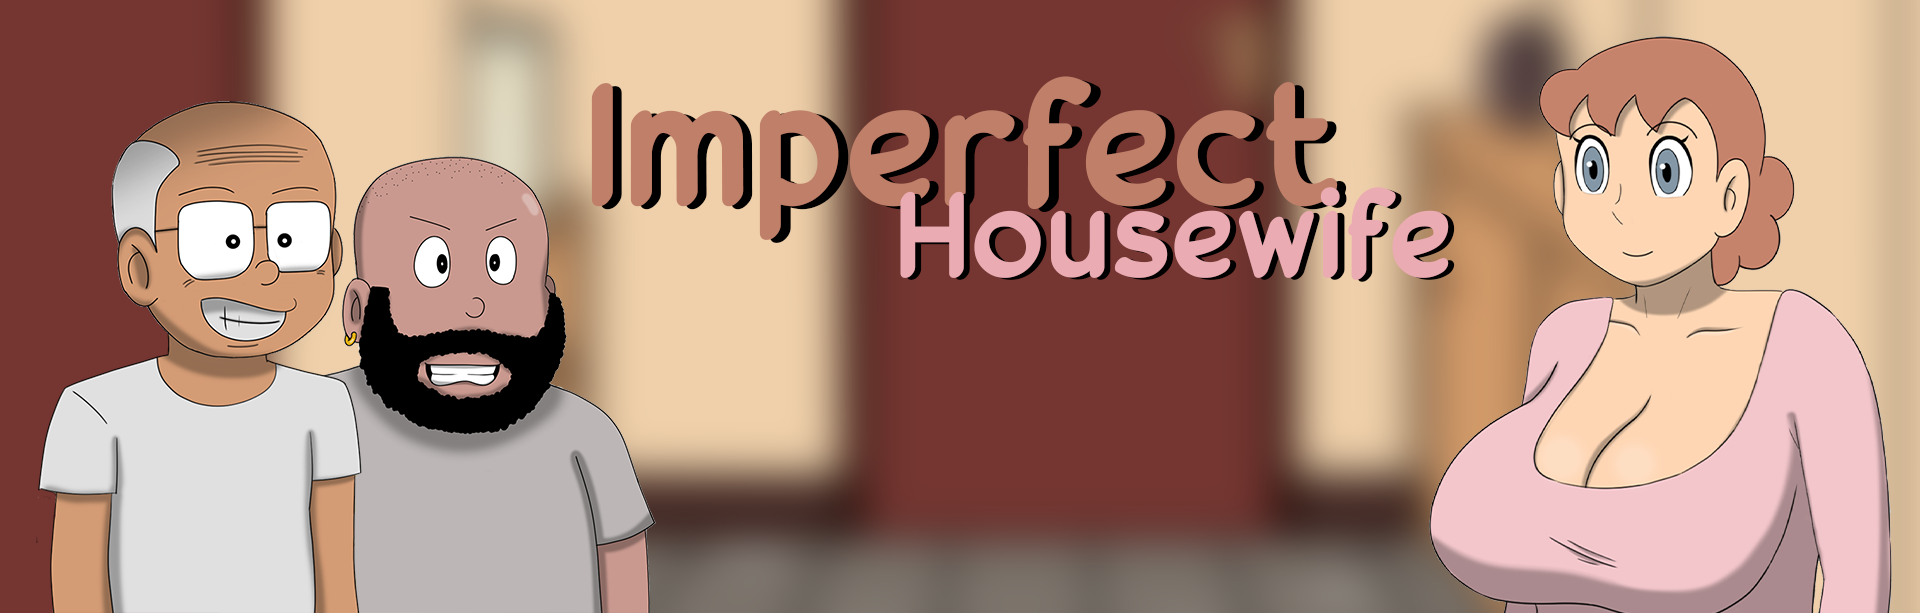 Imperfect Housewife1.png